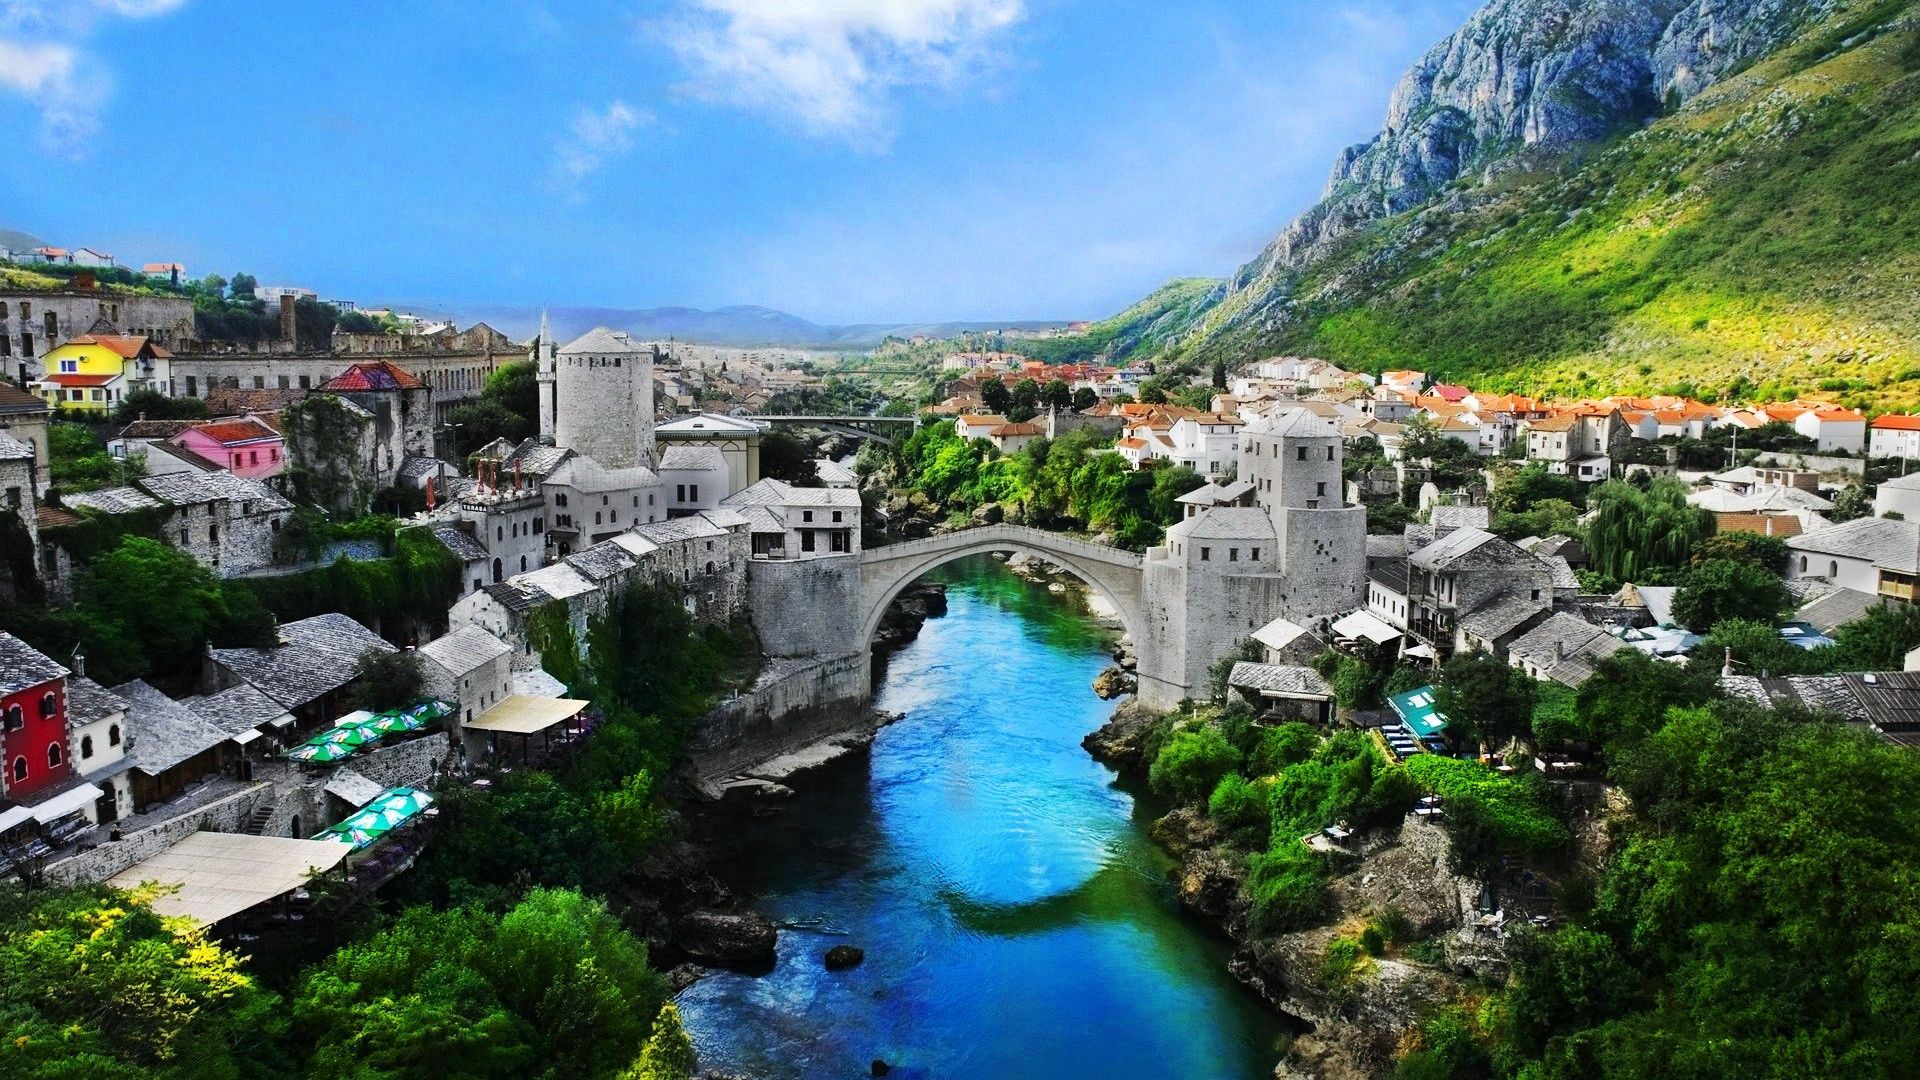 145473 download wallpaper cities, landscape, nature, bosnia and herzegovina, mostar old town, mostar screensavers and pictures for free